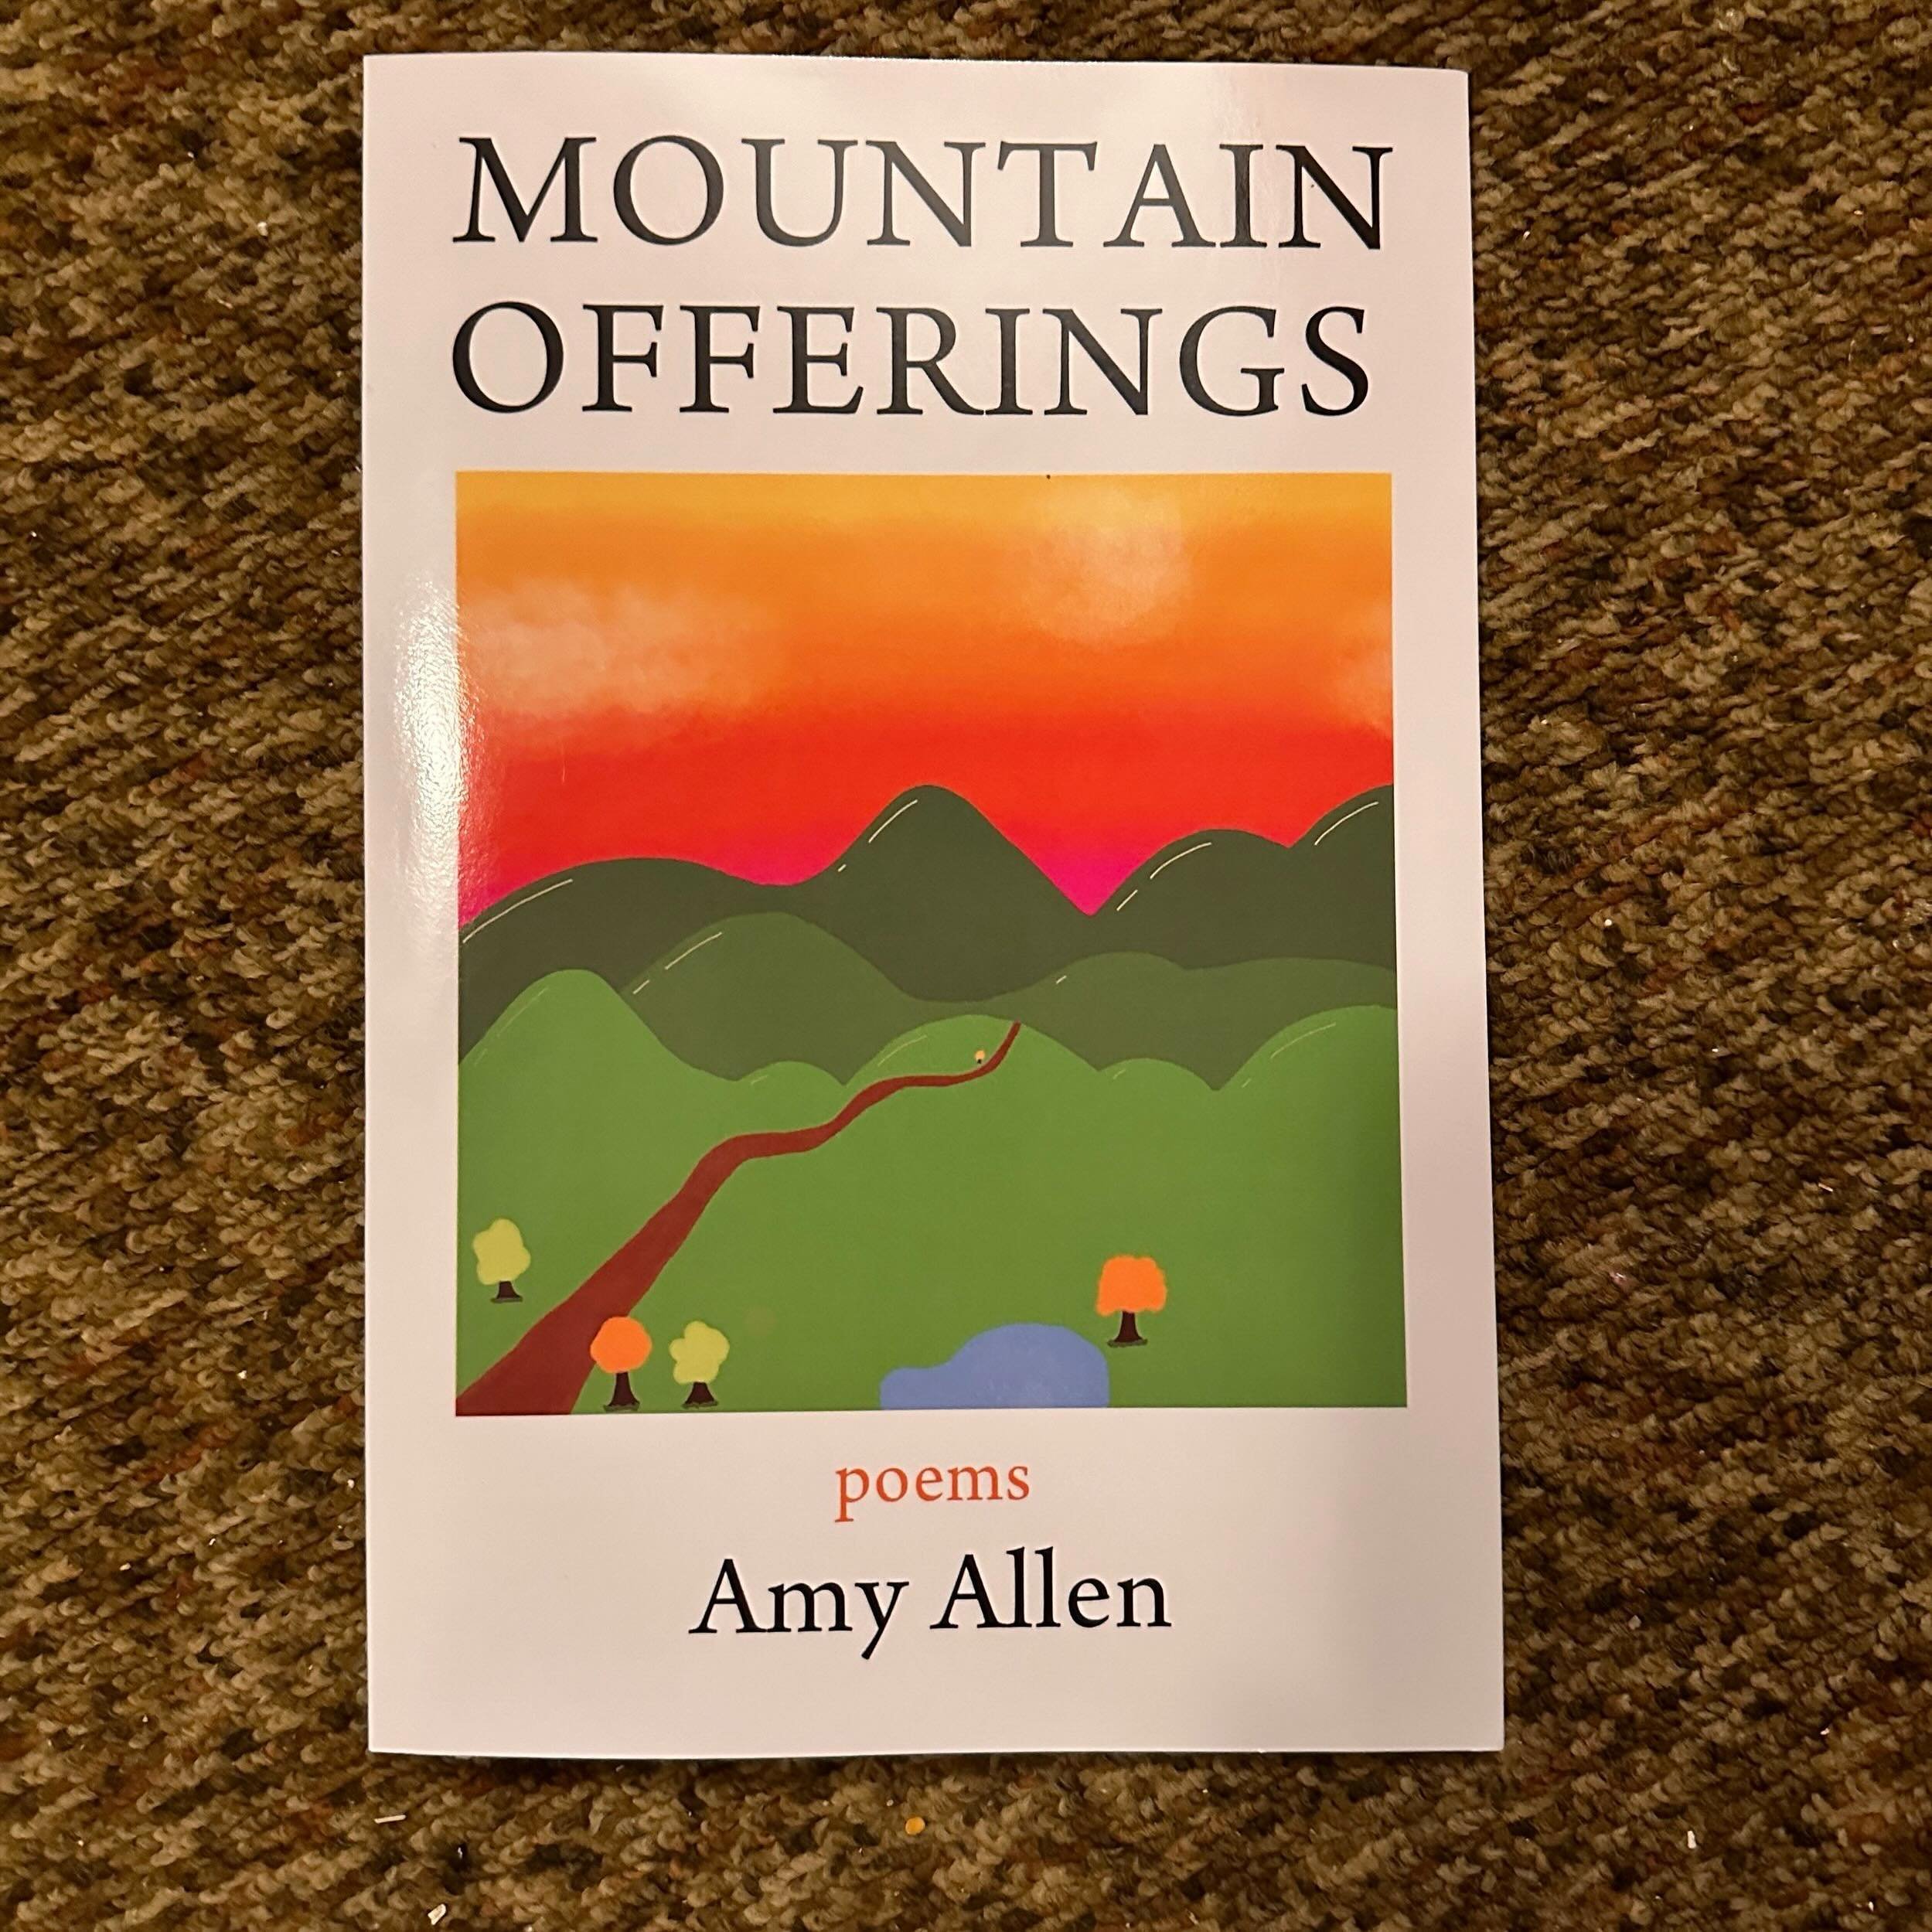 Thanks to @storycomic for featuring this review in their latest newsletter!

A BREATH OF FRESH MOUNTAIN AIR: A REVIEW OF &lsquo;MOUNTAIN OFFERINGS&rsquo; BY AMY ALLEN
In contemporary poetry, Amy Allen&rsquo;s &lsquo;Mountain Offerings&rsquo; emerges 